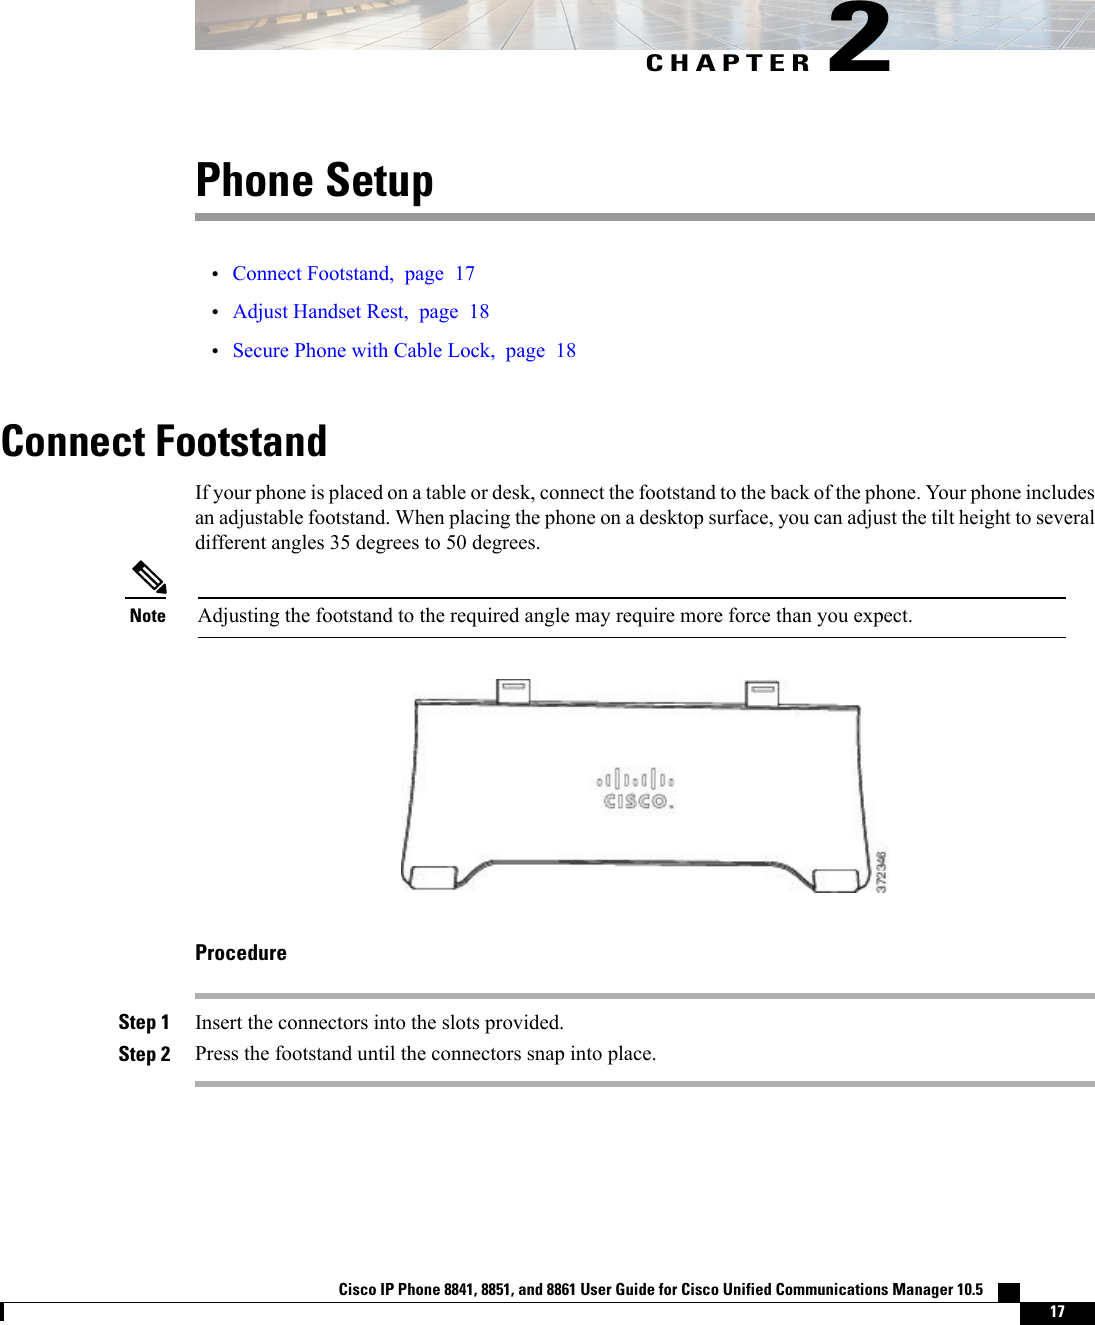 CHAPTER 2Phone Setup•Connect Footstand, page 17•Adjust Handset Rest, page 18•Secure Phone with Cable Lock, page 18Connect FootstandIf your phone is placed on a table or desk, connect the footstand to the back of the phone. Your phone includesan adjustable footstand. When placing the phone on a desktop surface, you can adjust the tilt height to severaldifferent angles 35 degrees to 50 degrees.Adjusting the footstand to the required angle may require more force than you expect.NoteProcedureStep 1 Insert the connectors into the slots provided.Step 2 Press the footstand until the connectors snap into place.Cisco IP Phone 8841, 8851, and 8861 User Guide for Cisco Unified Communications Manager 10.5    17